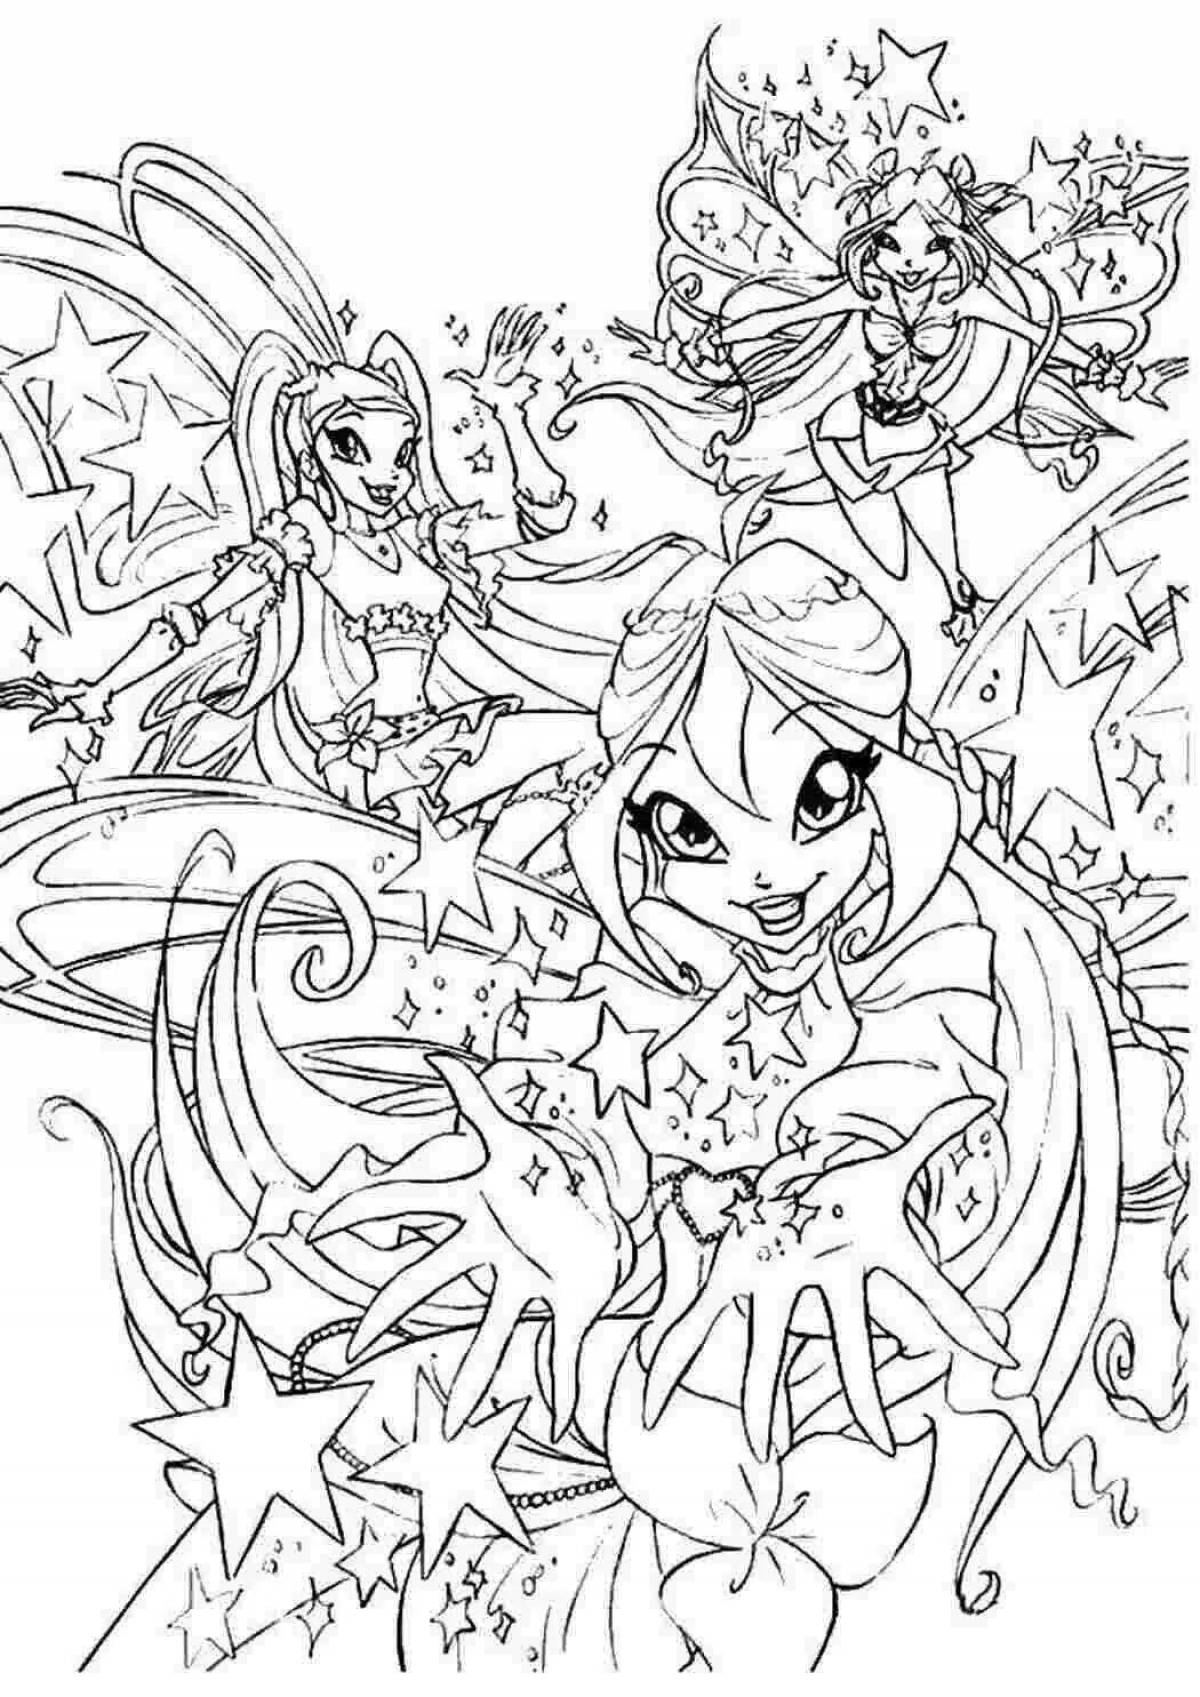 Holiday Winx coloring together